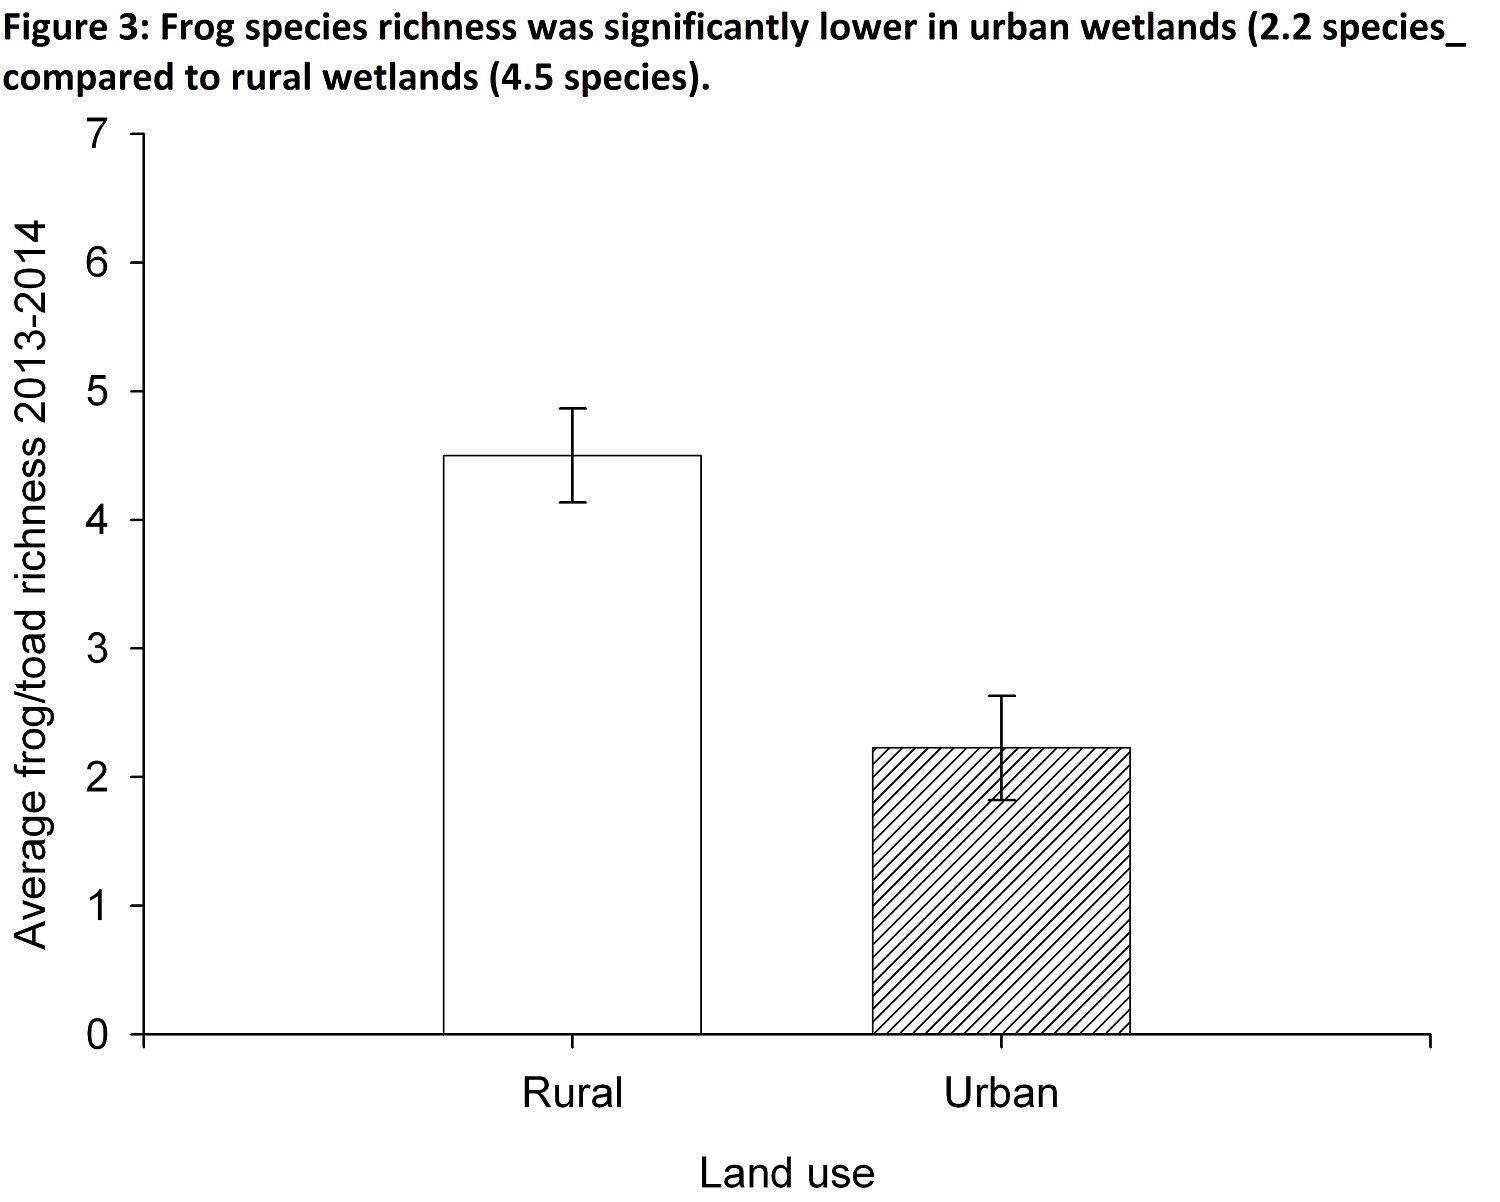 Chart showing frog species richness was significantly lower in urban wetlands versus rural wetlands